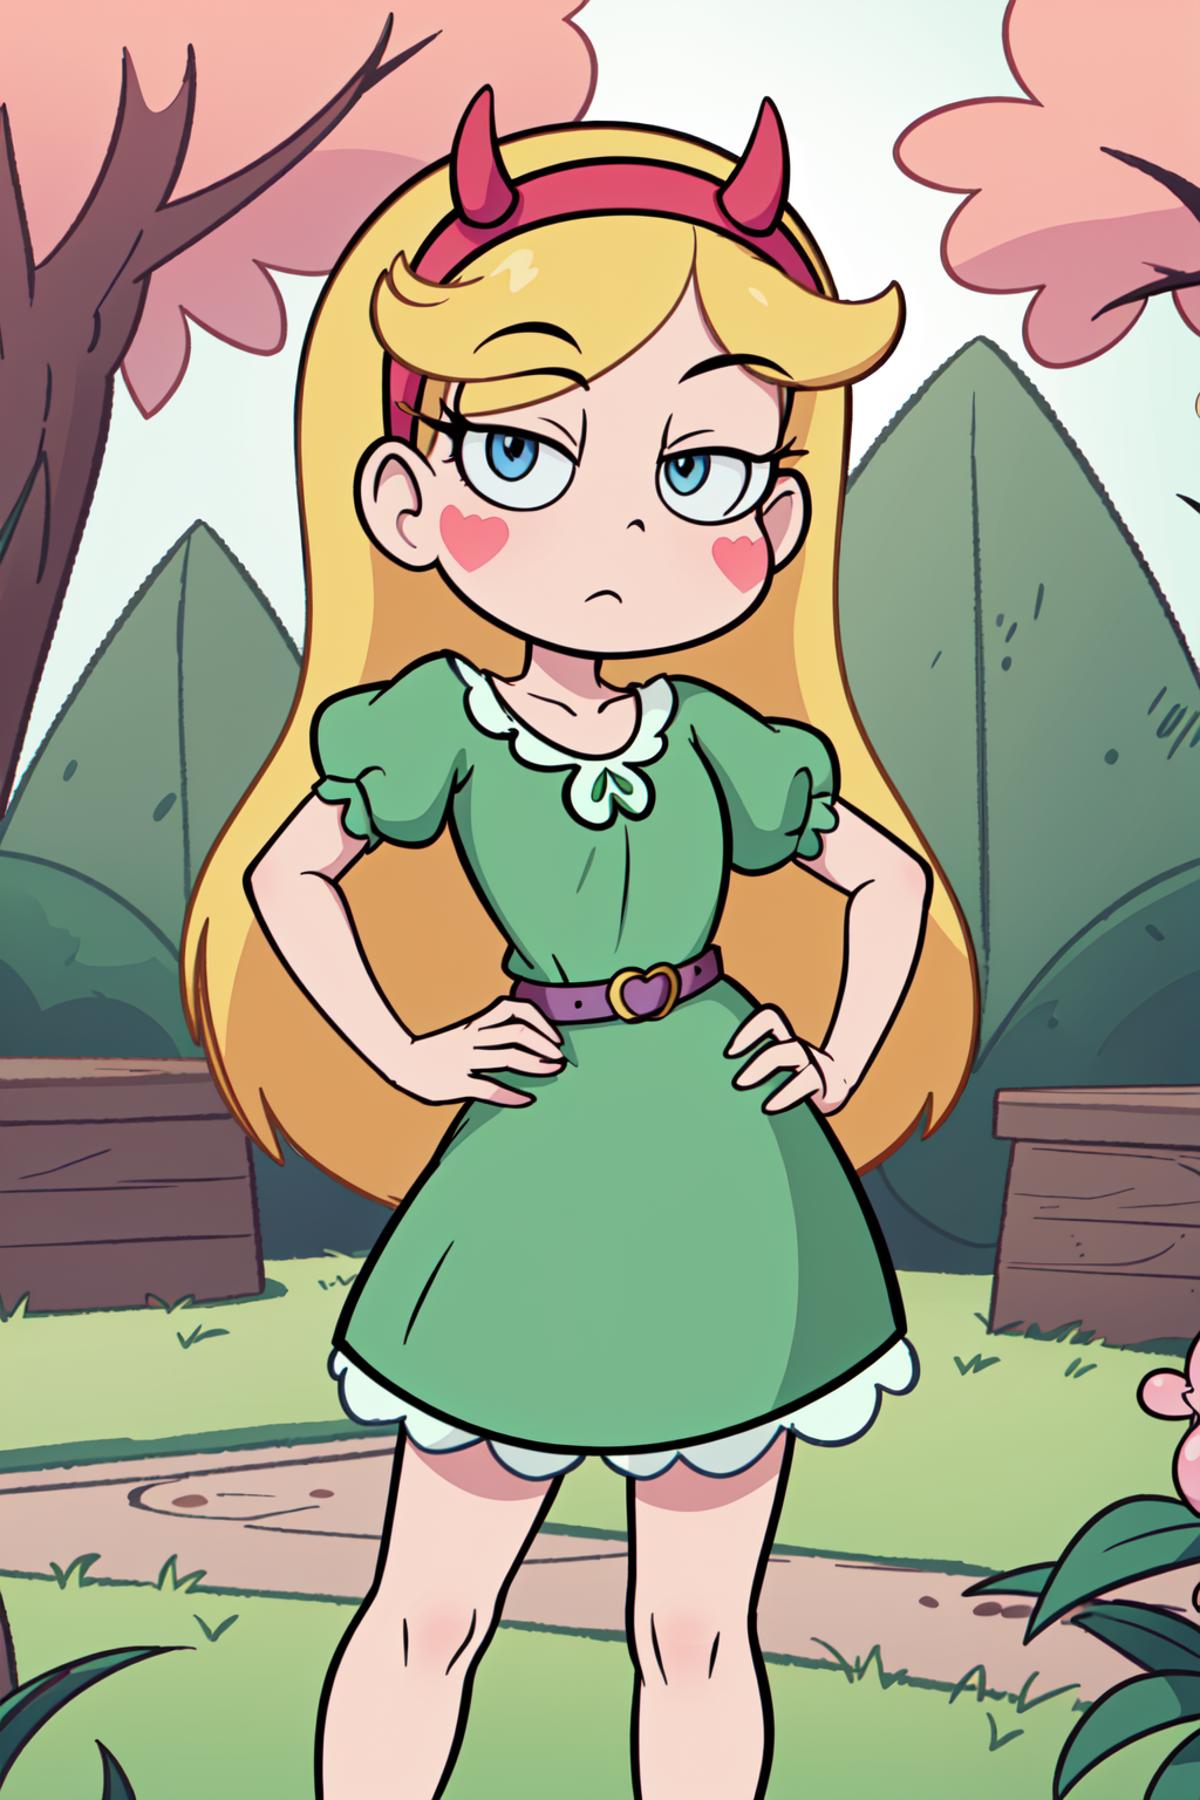 Star vs. the forces of evil - Star Butterfly image by Mysterious_Bride